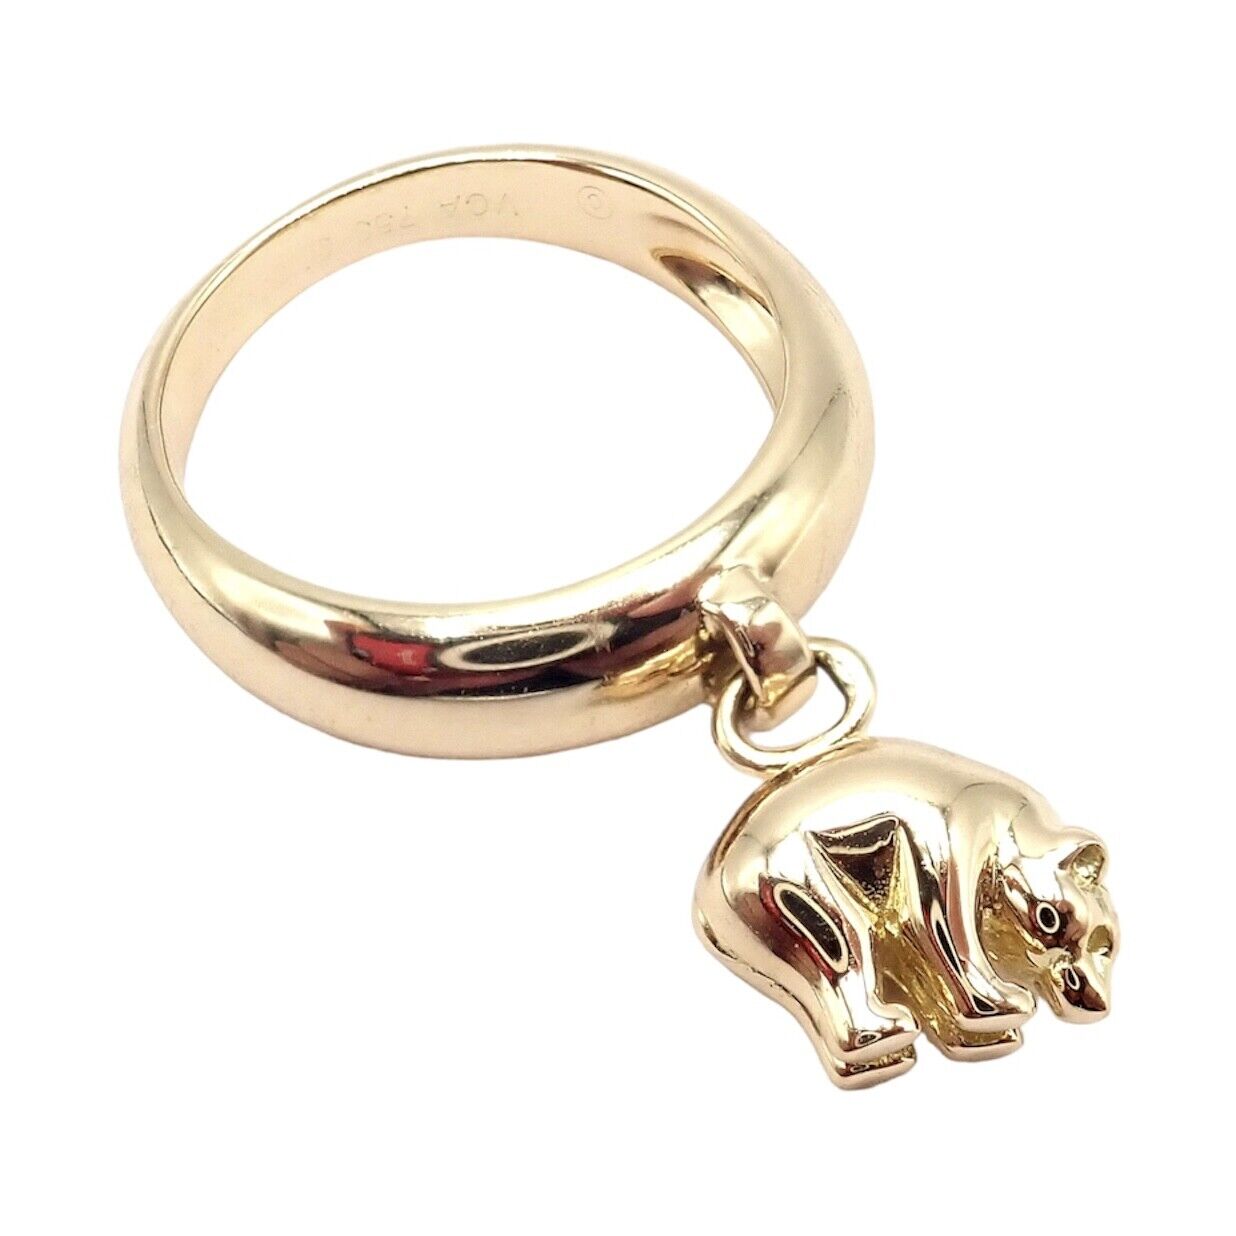 Van Cleef & Arpels Jewelry & Watches:Fine Jewelry:Rings Rare! Authentic Van Cleef & Arpels 18k Yellow Gold Bear Charm Band Ring